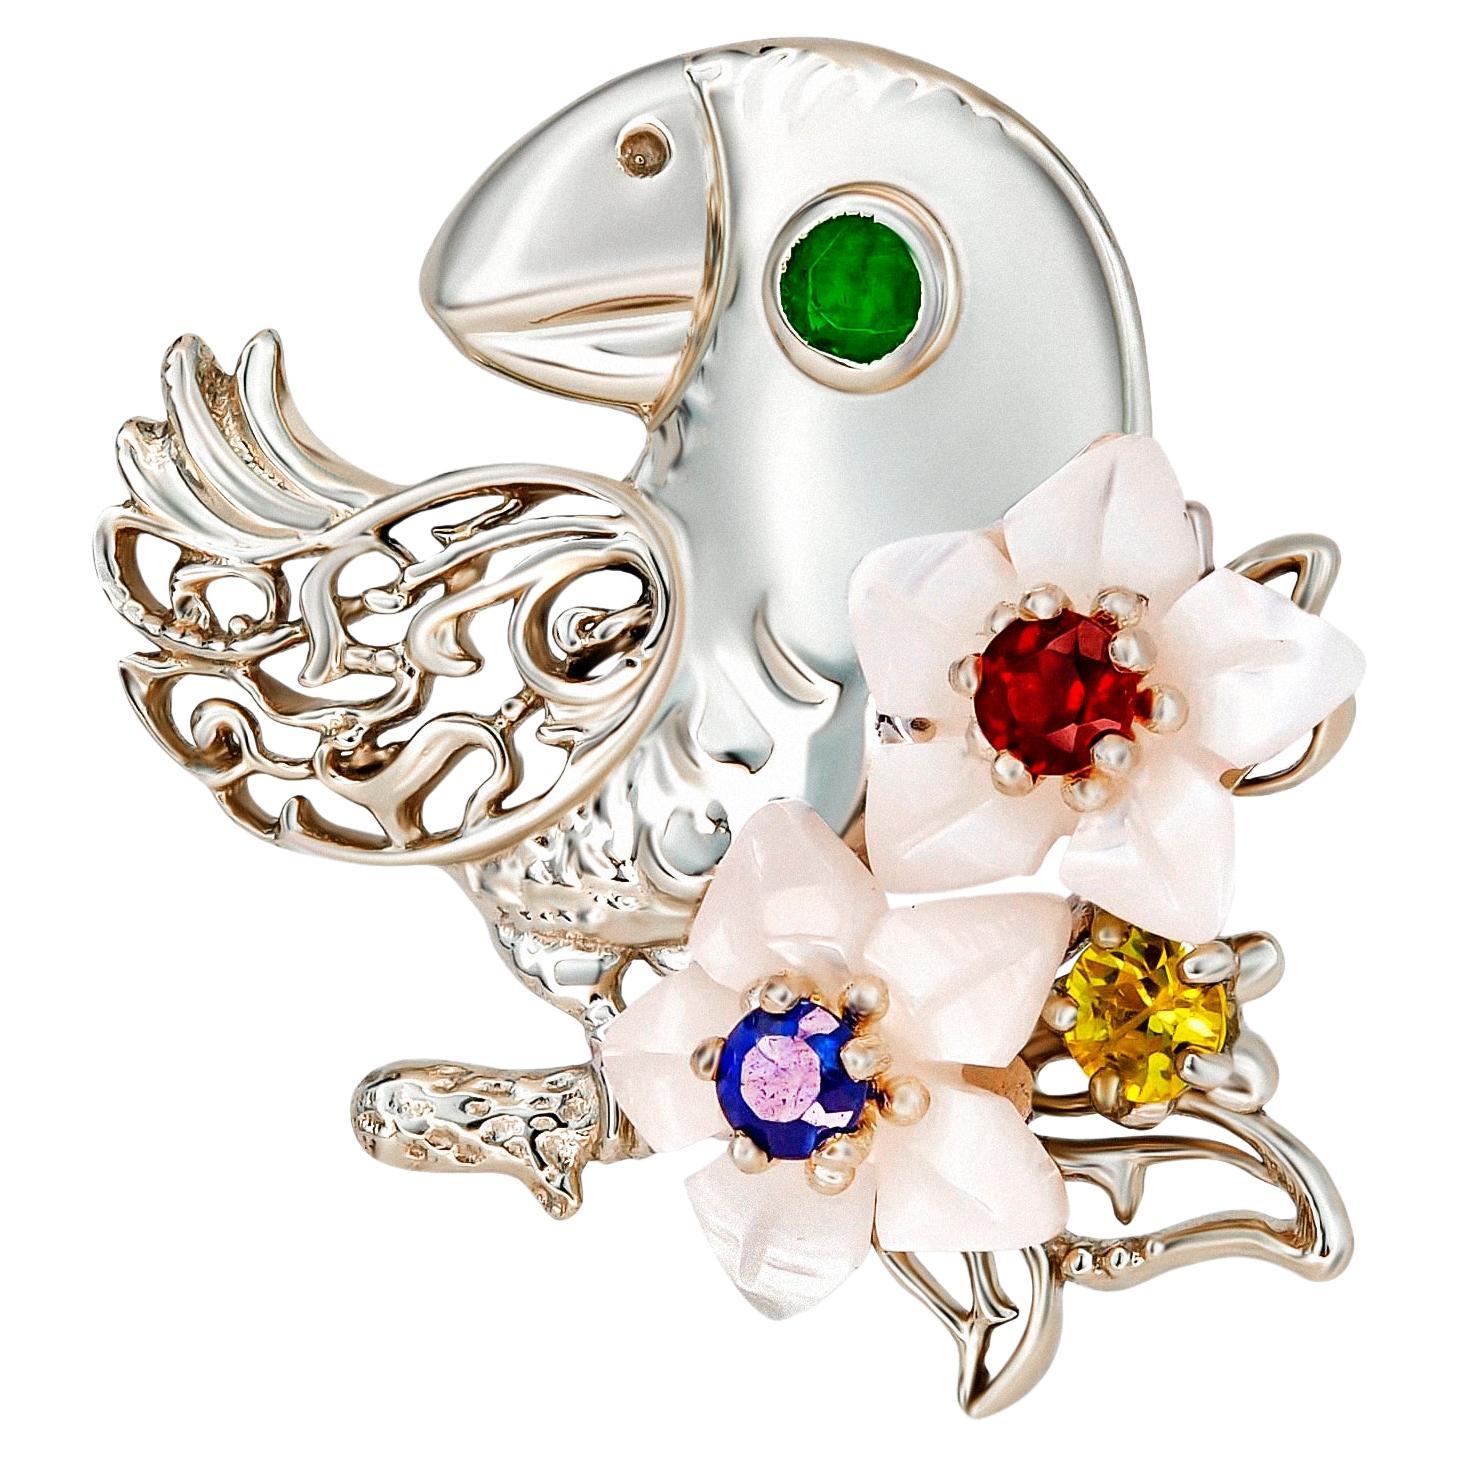 Parrot on flower pendant with colored gems. 